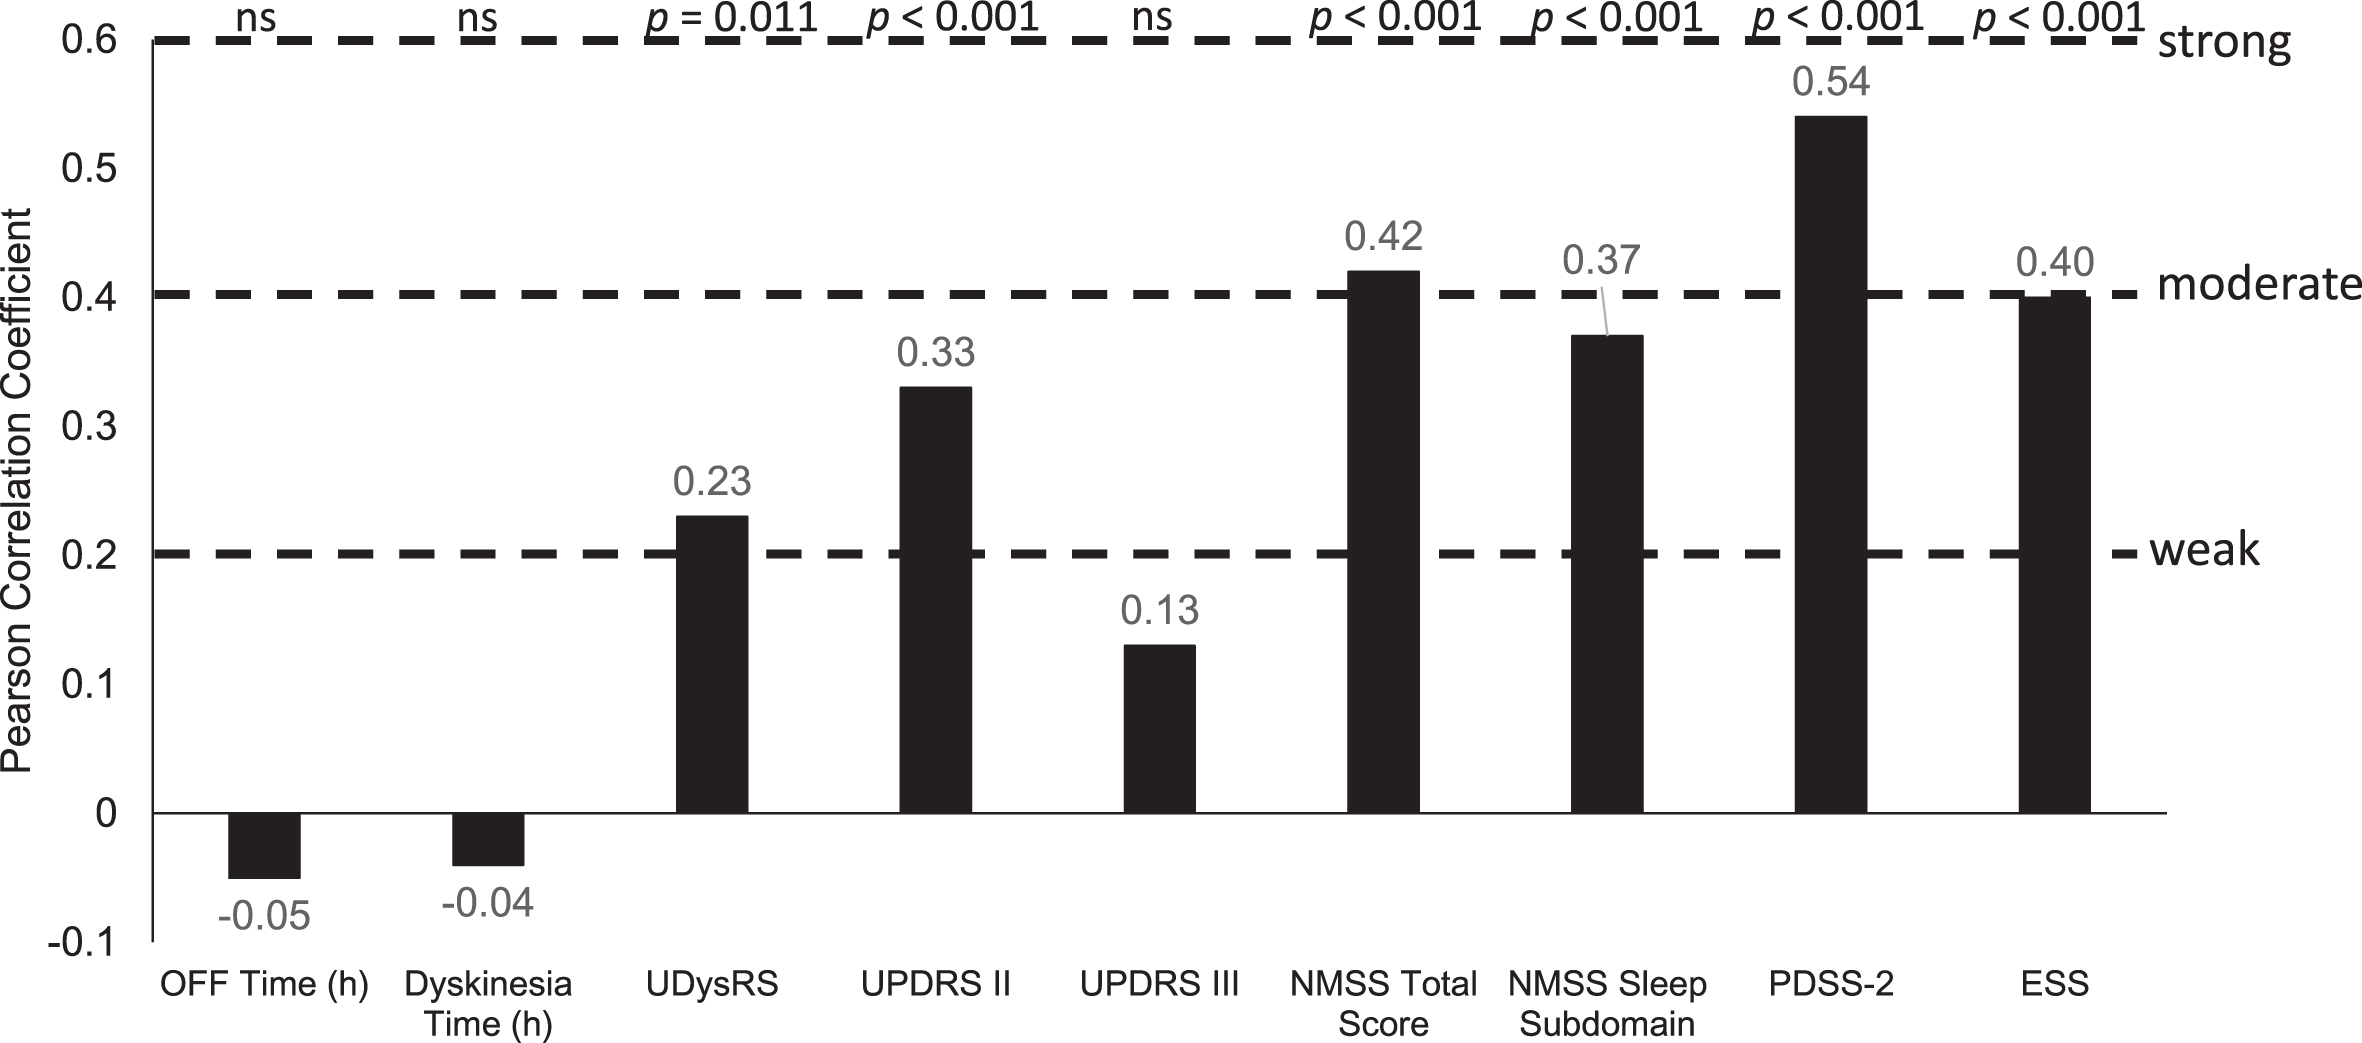 Correlation of change from baseline in efficacy parameters with PDQ-8 change from baseline. ESS, Epworth Sleepiness Scale; h, hour; NMSS, Non-Motor Symptom Scale; ns, not significant; PDQ-8, 8-item Parkinson’s Disease Questionnaire; PDSS-2, Parkinson’s Disease Sleep Scale-2; UDysRS, Unified Dyskinesia Rating Scale; UPDRS, Unified Parkinson’s Disease Rating Scale.